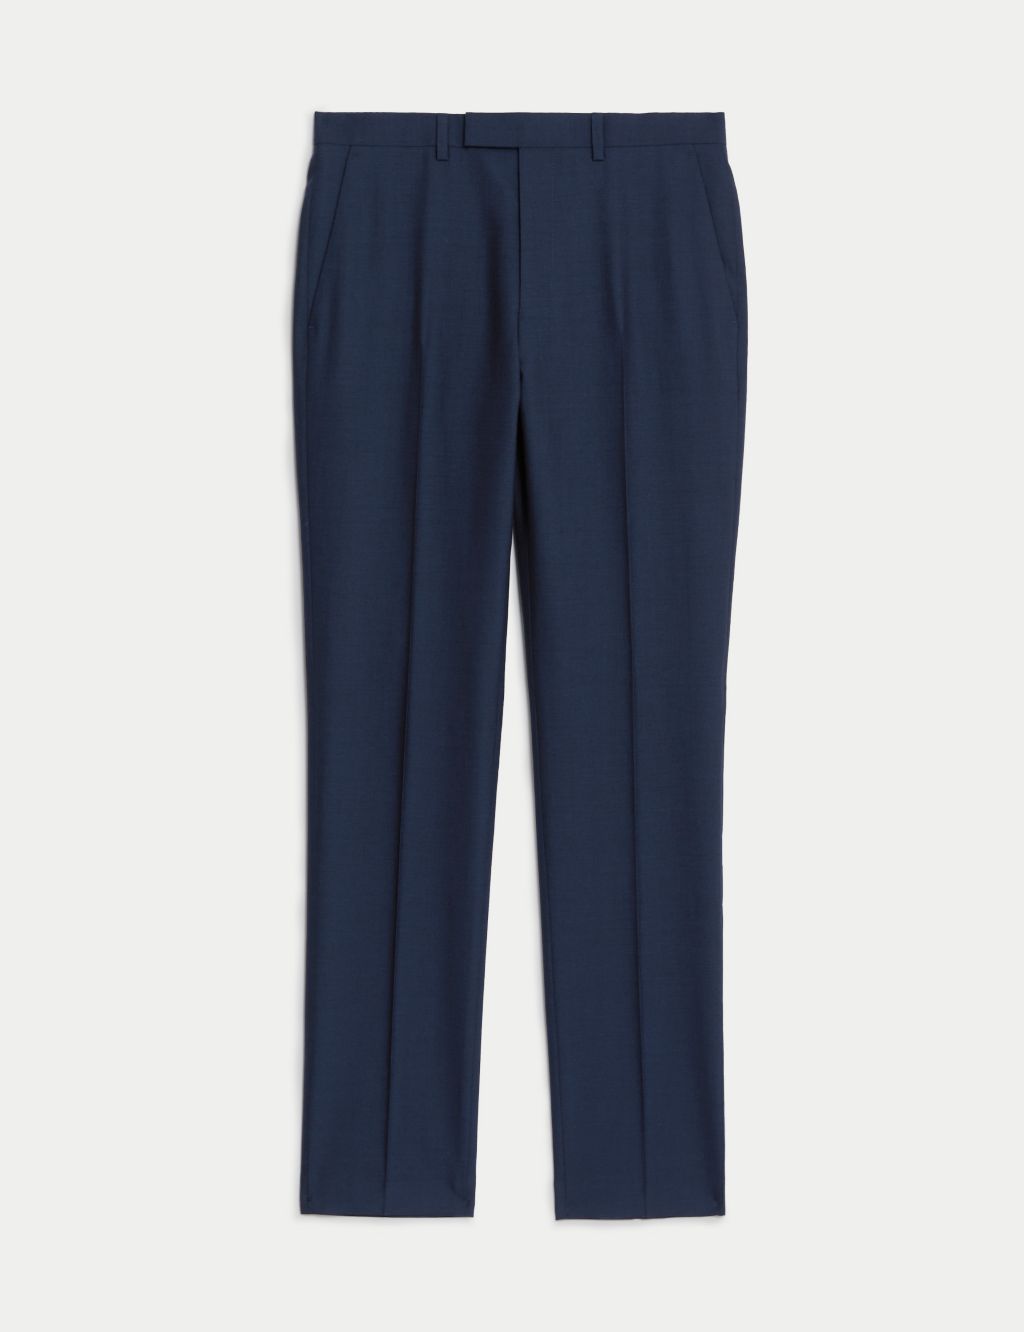 Slim Fit Pure Wool Suit Trousers image 1